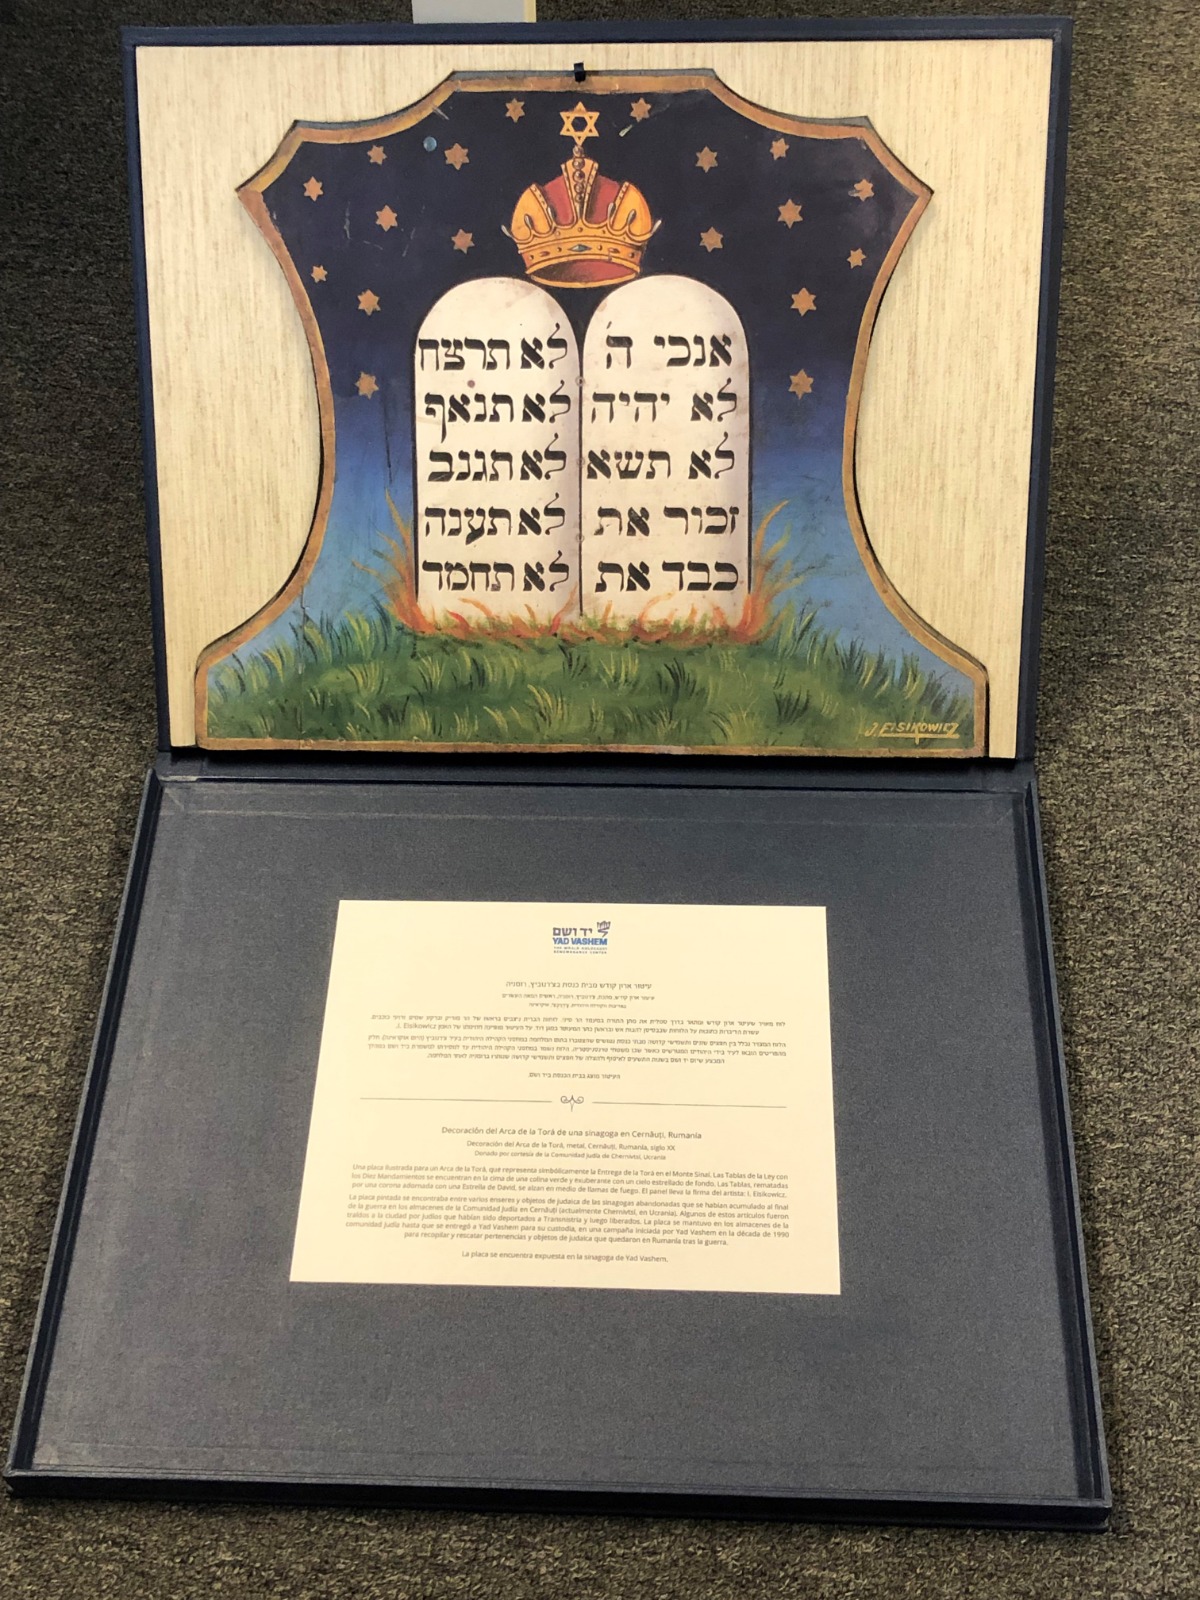 A replica of a colorful synagogue painting depicting the Tablets of the Covenant that once adorned a Torah Ark in Cernăuți, Romania, presented to His Holiness Pope Francis by Yad Vashem Chairman Dani Dayan during his private audience at the Vatican